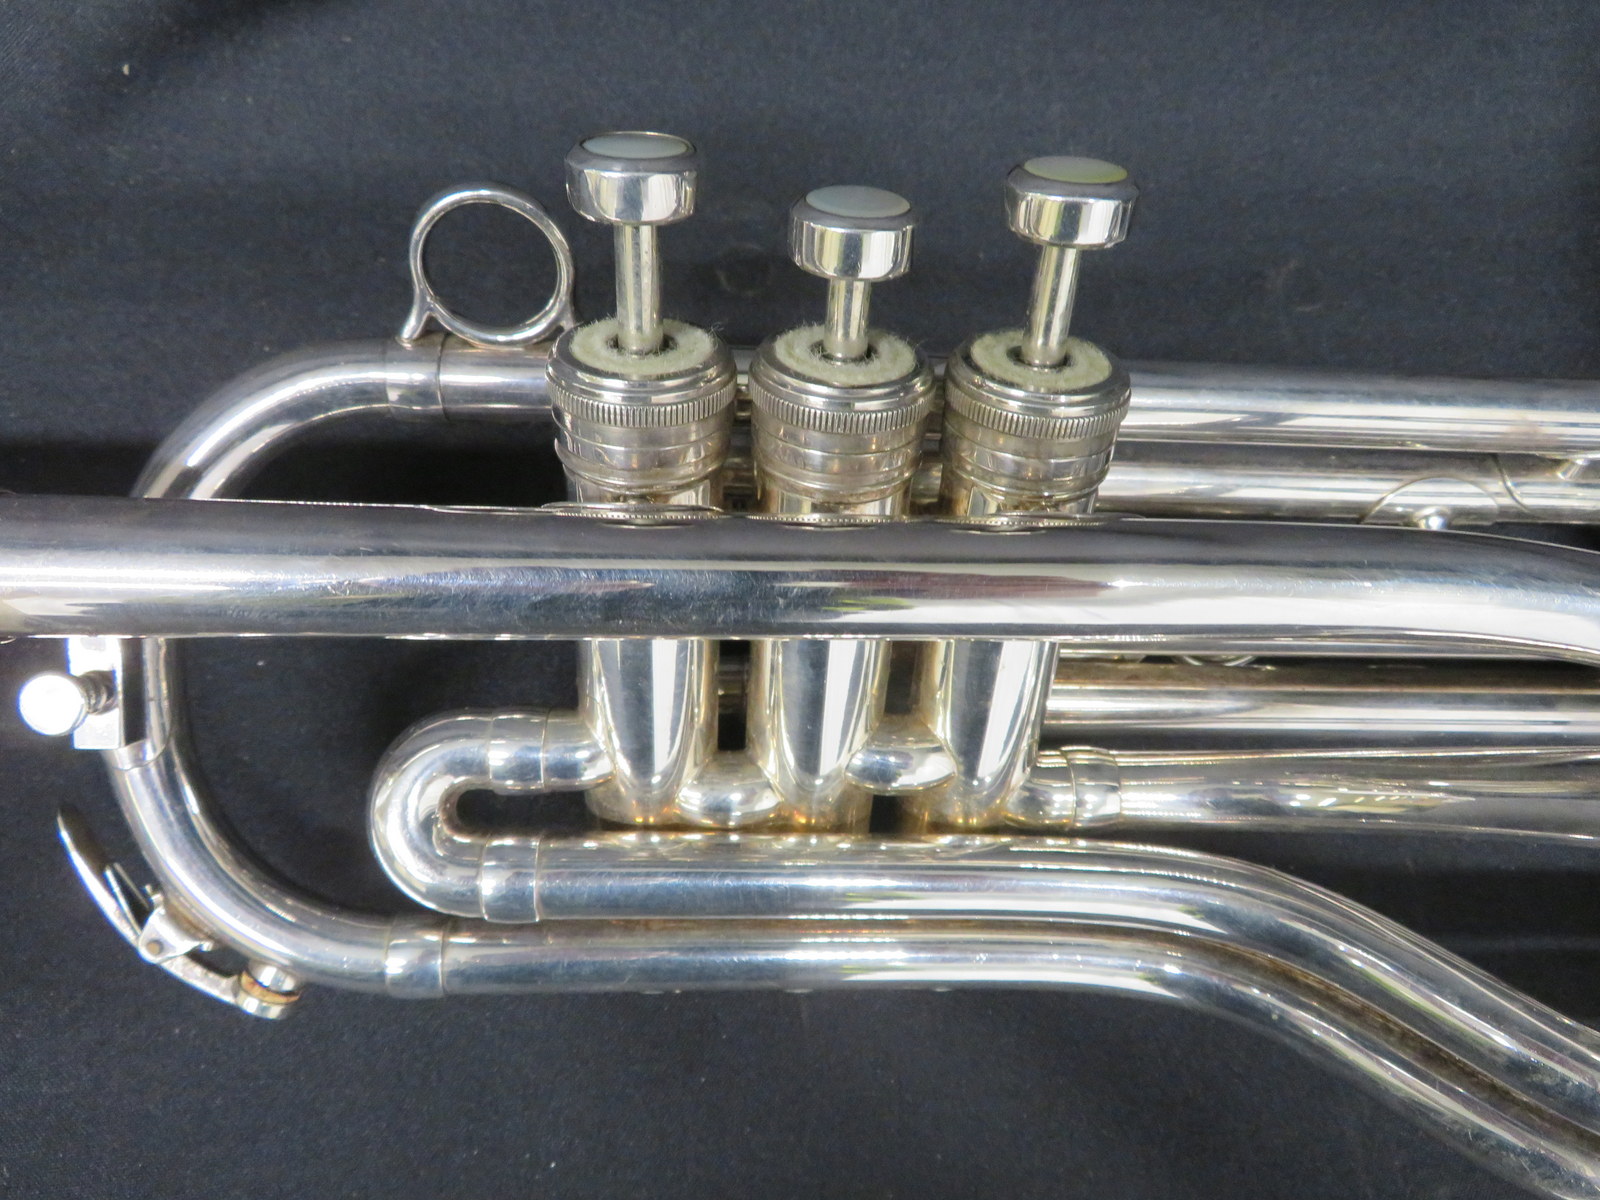 Boosey & Hawkes Besson 700 London tenor fanfare trumpet with case. Serial number: 707-721126. - Image 6 of 18